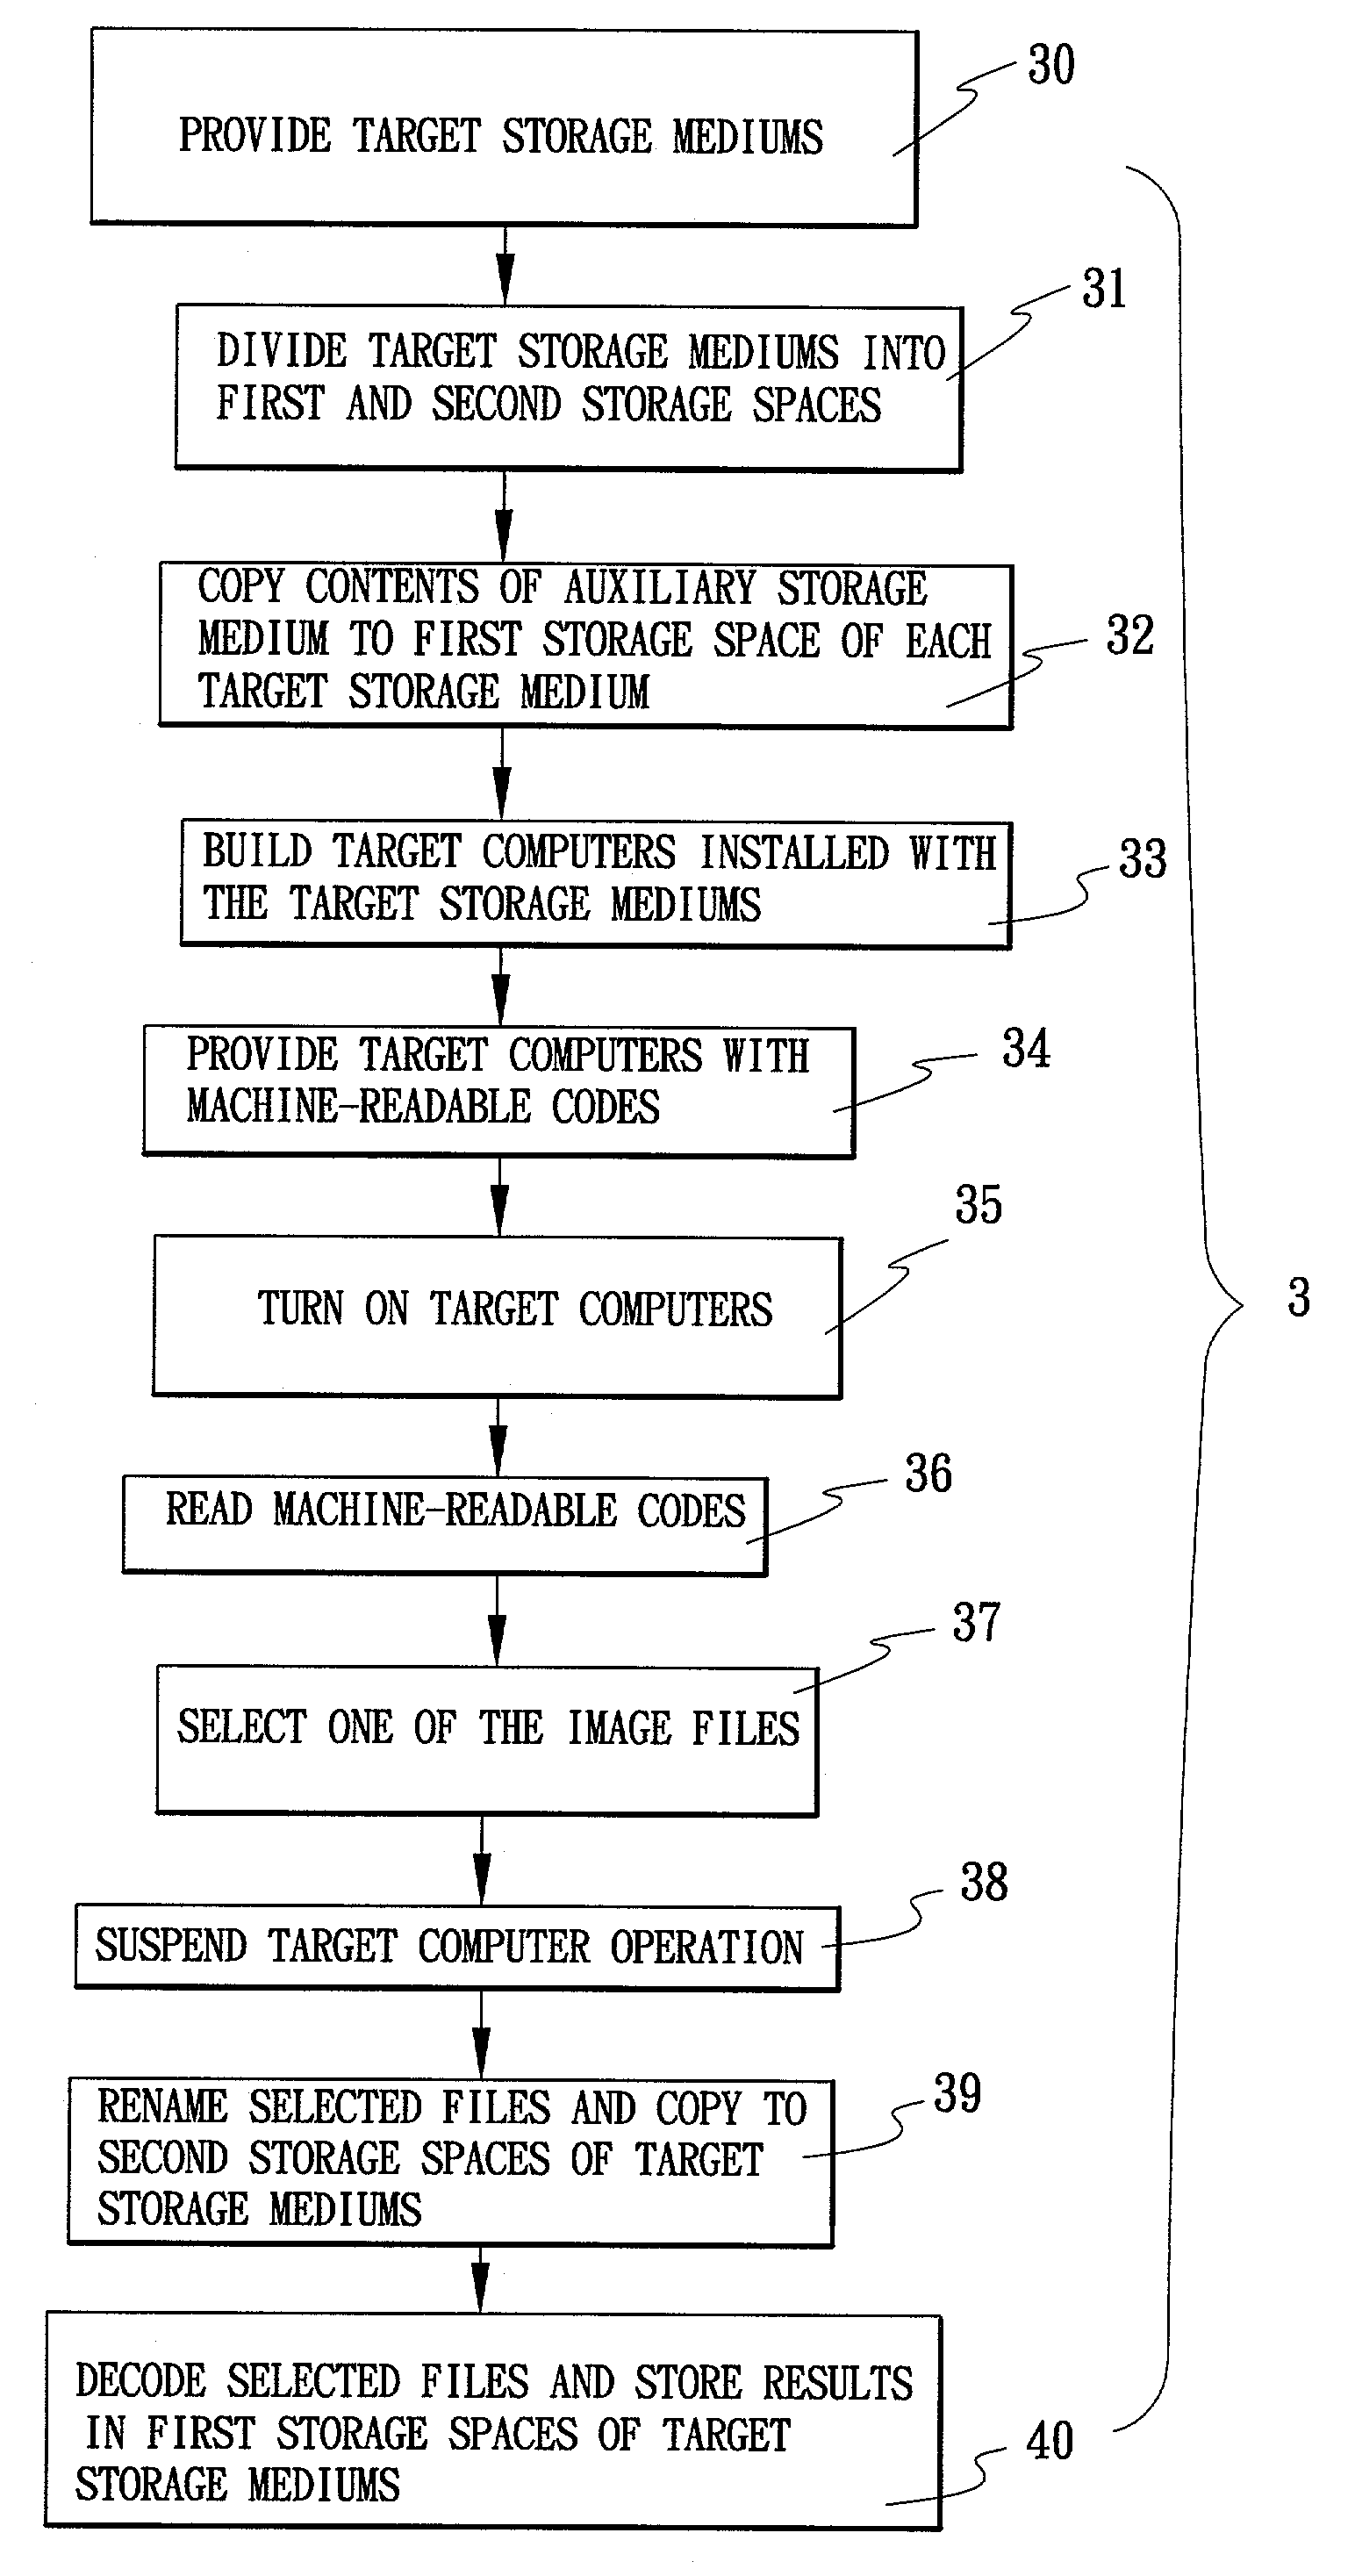 Method of creating image files and installing software bundles on target computers